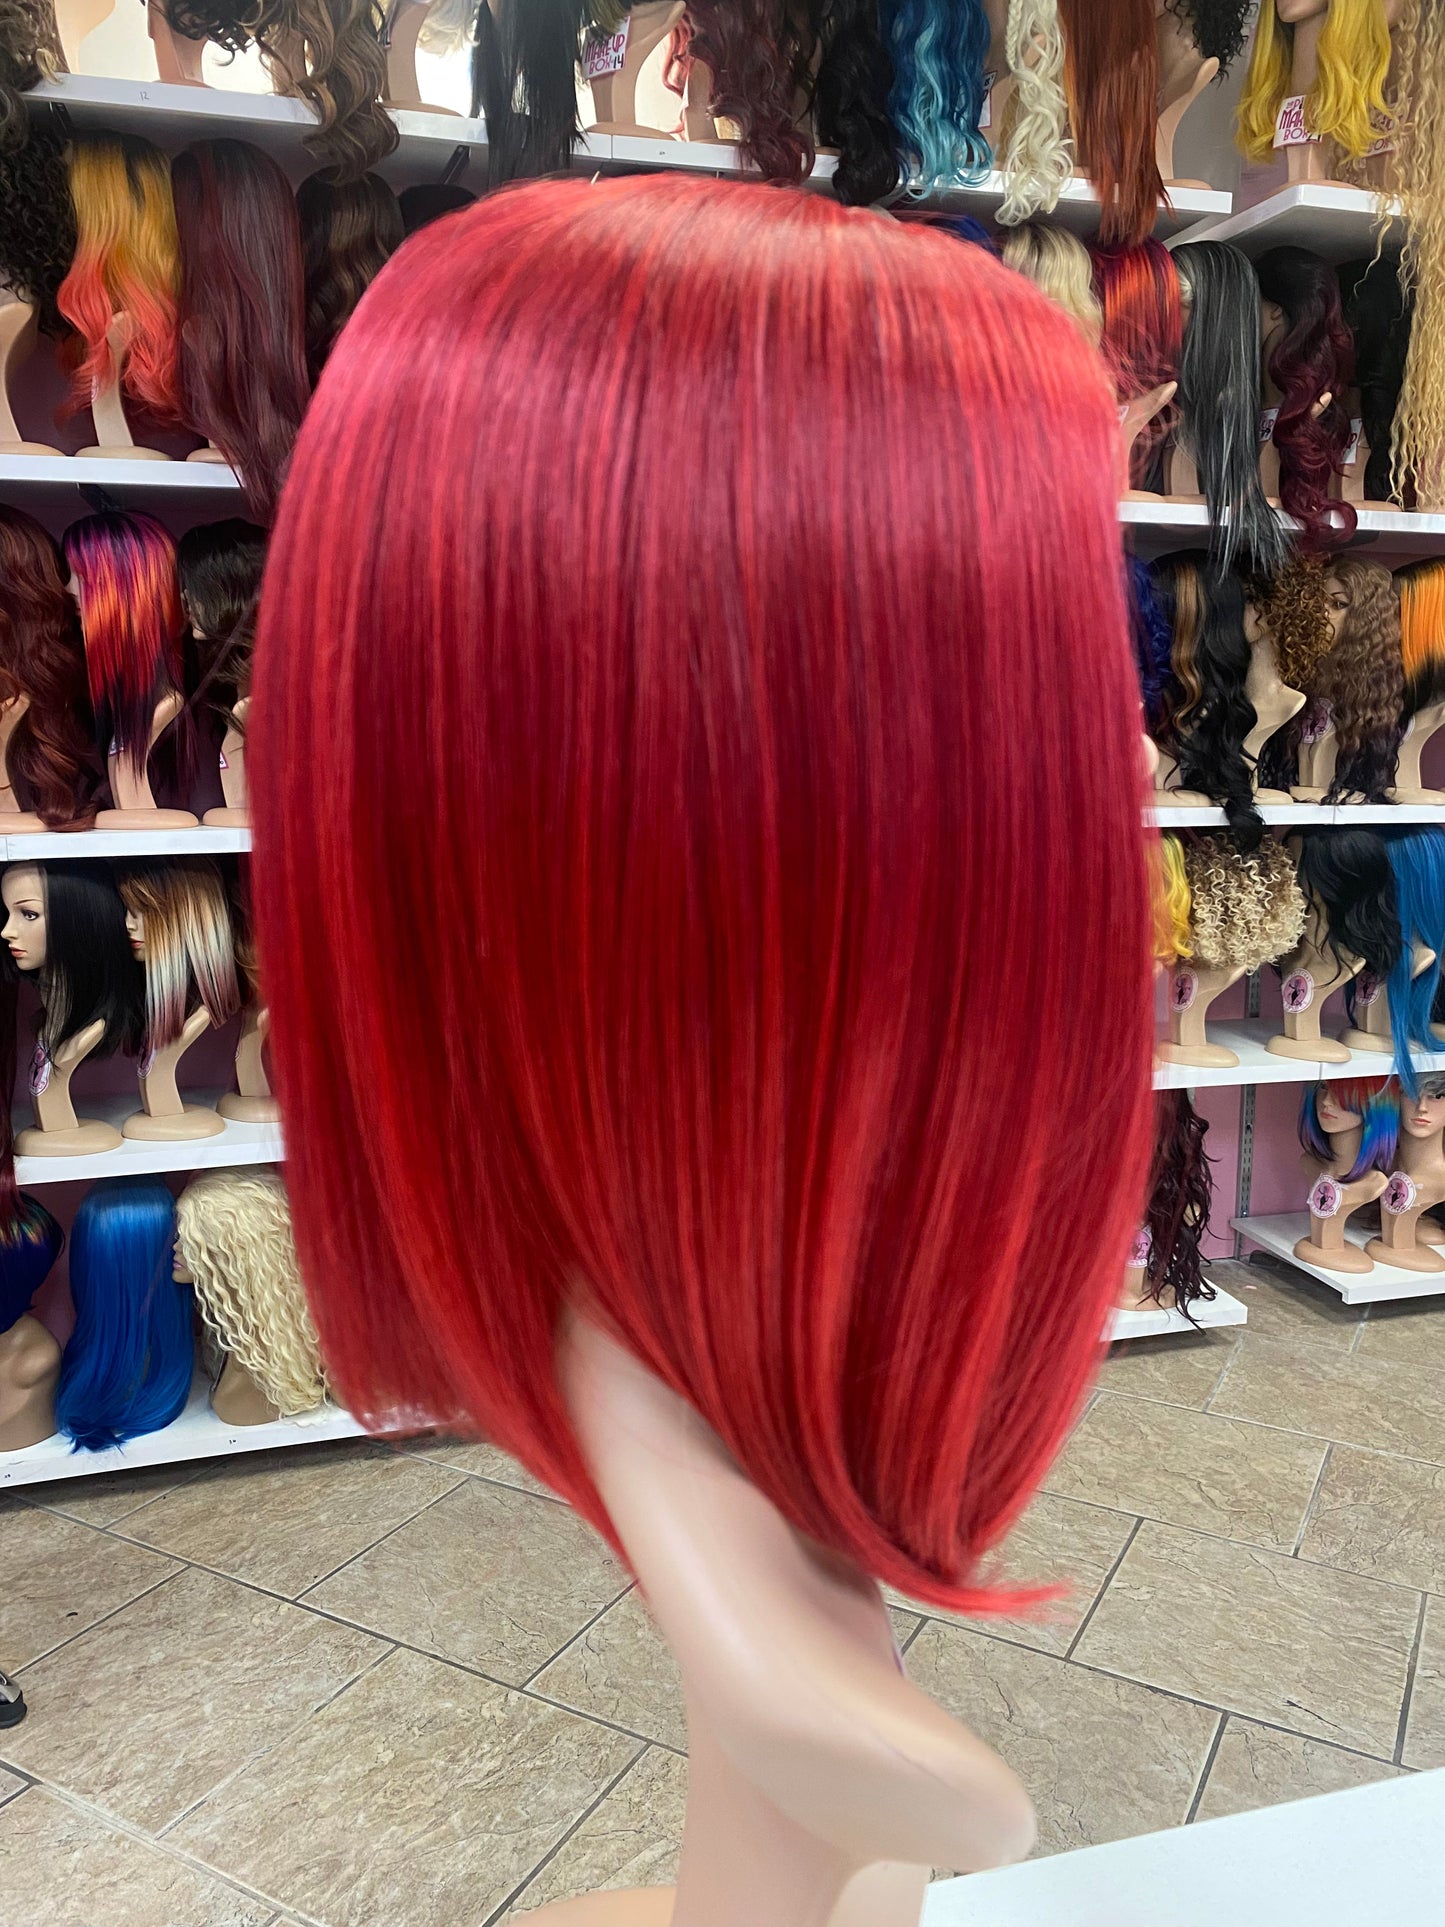 83 Hannah - Deep Middle Part Lace Front Wig - CHERRY RED - DaizyKat Cosmetics 83 Hannah - Deep Middle Part Lace Front Wig - CHERRY RED DaizyKat Cosmetics Wigs